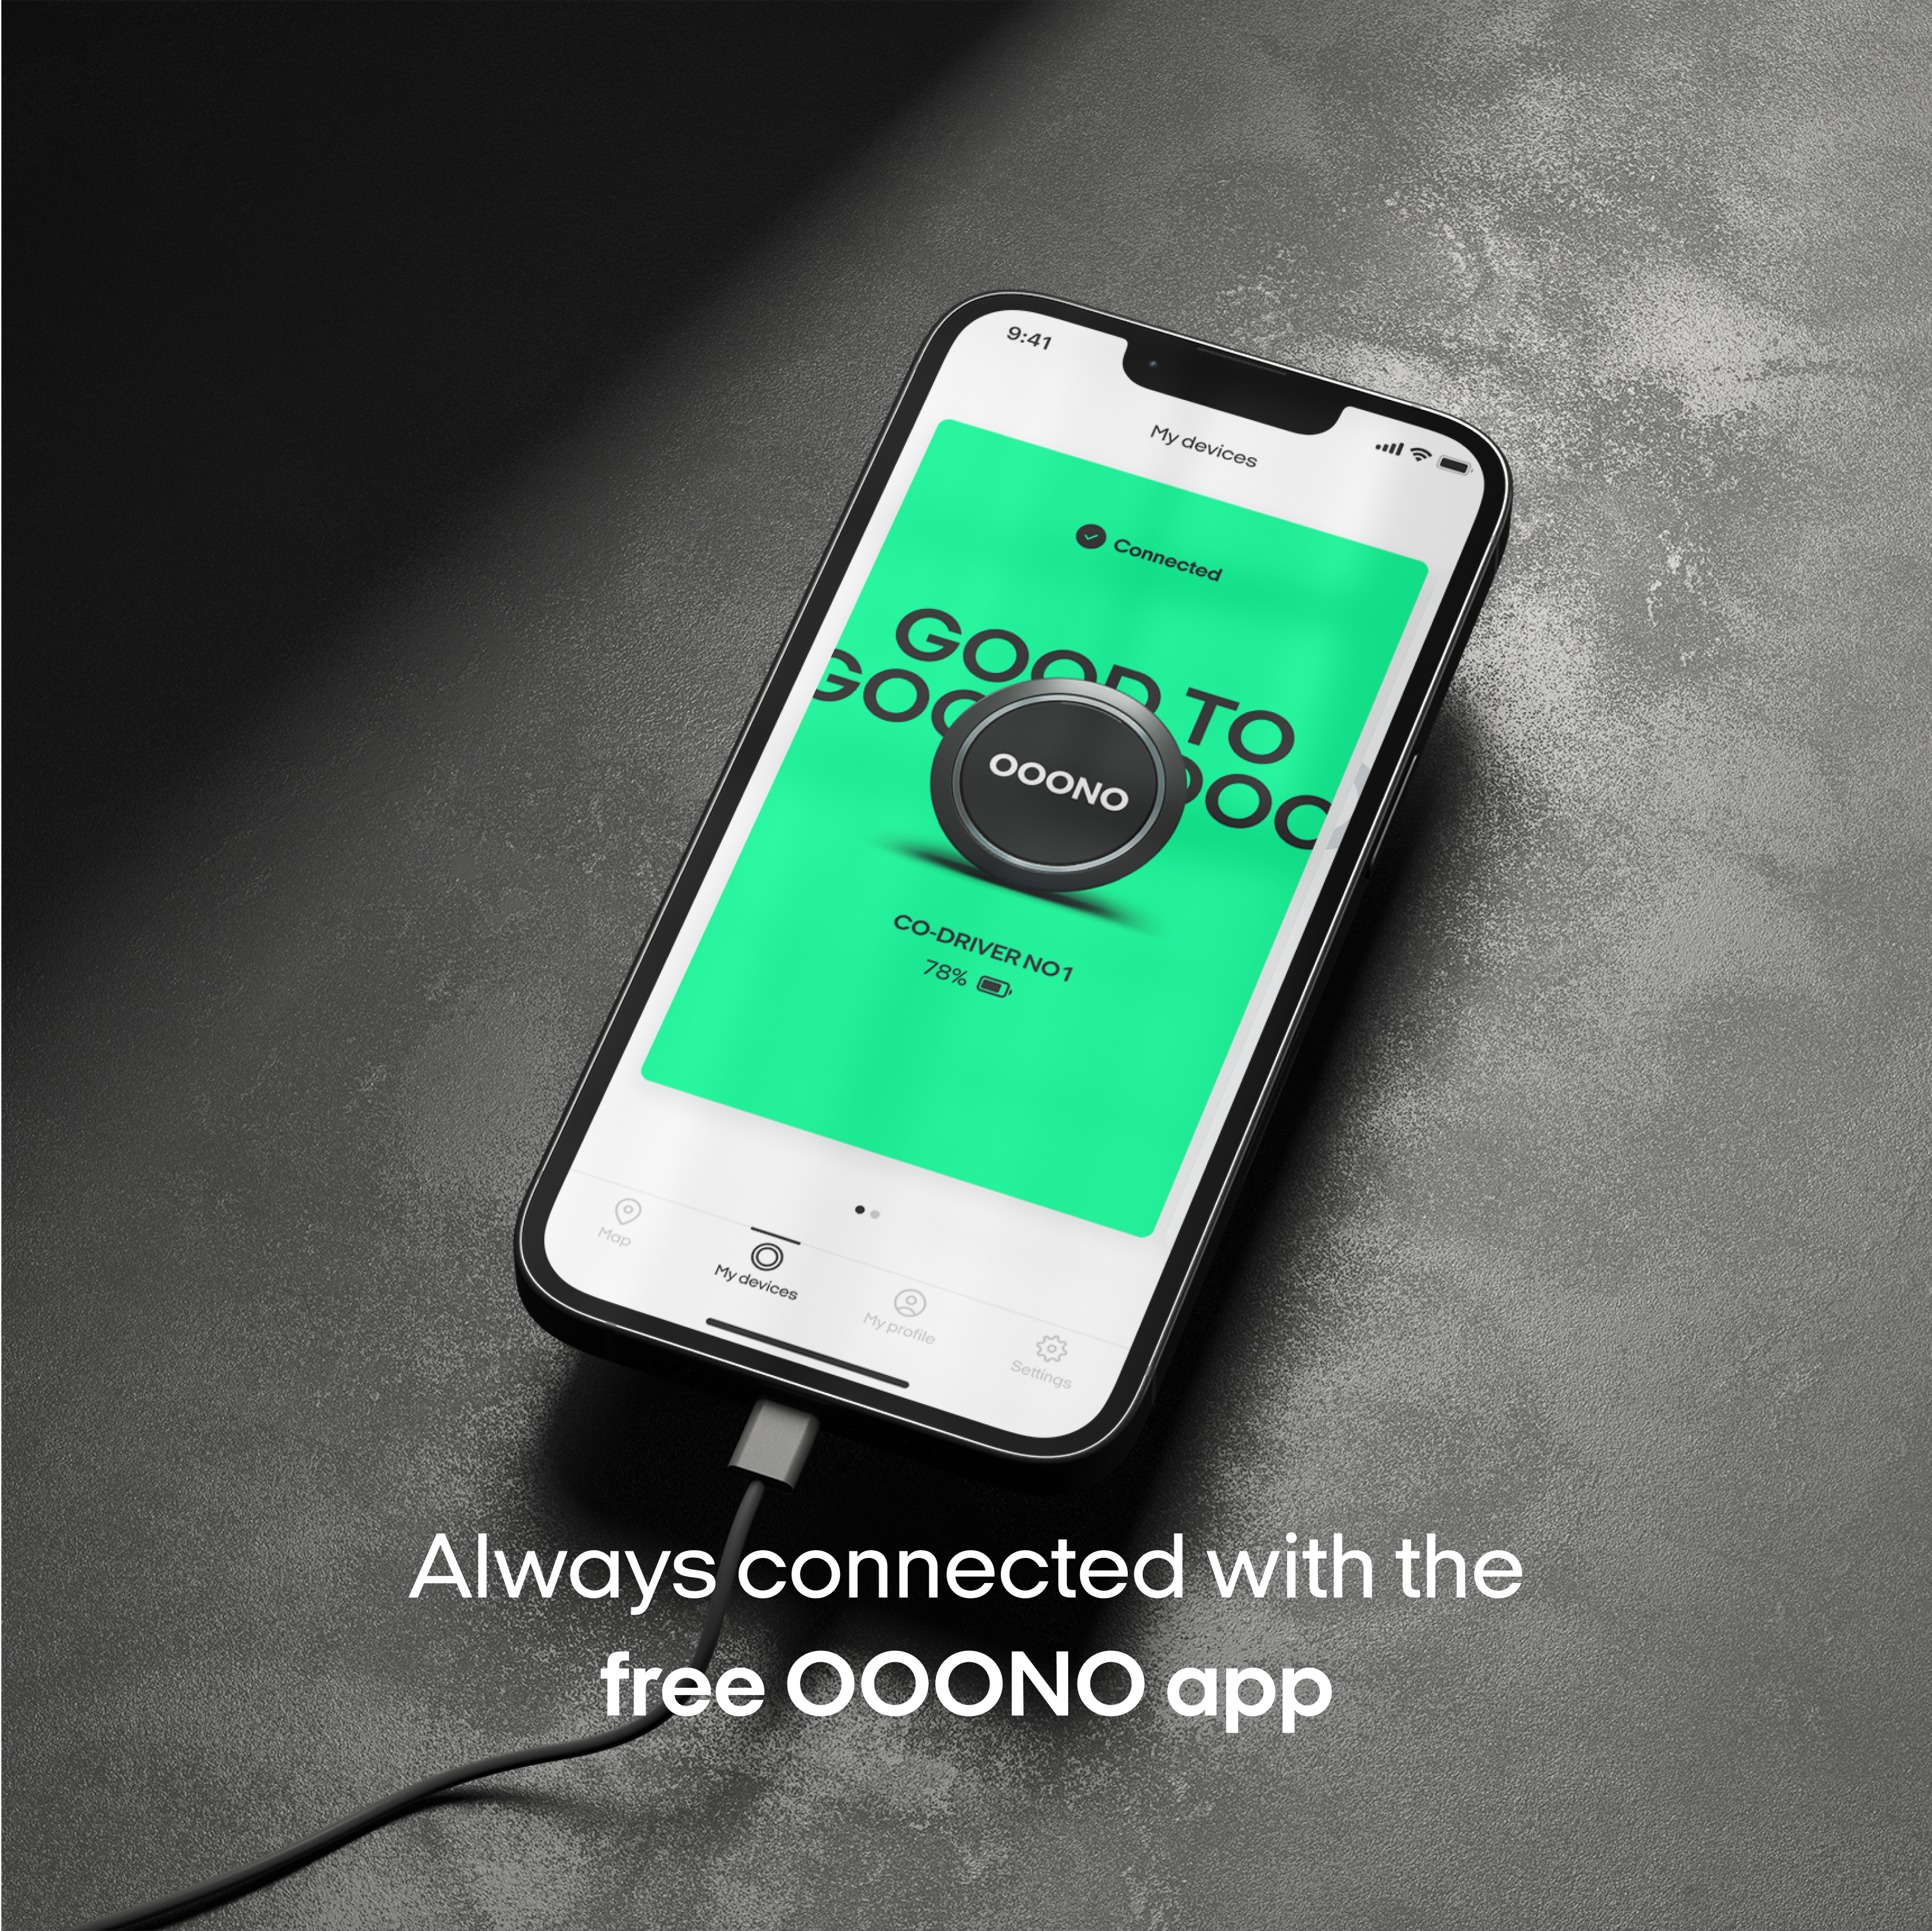 OOONO CO-Driver NO1: Warns of speed cameras and road hazards in real t